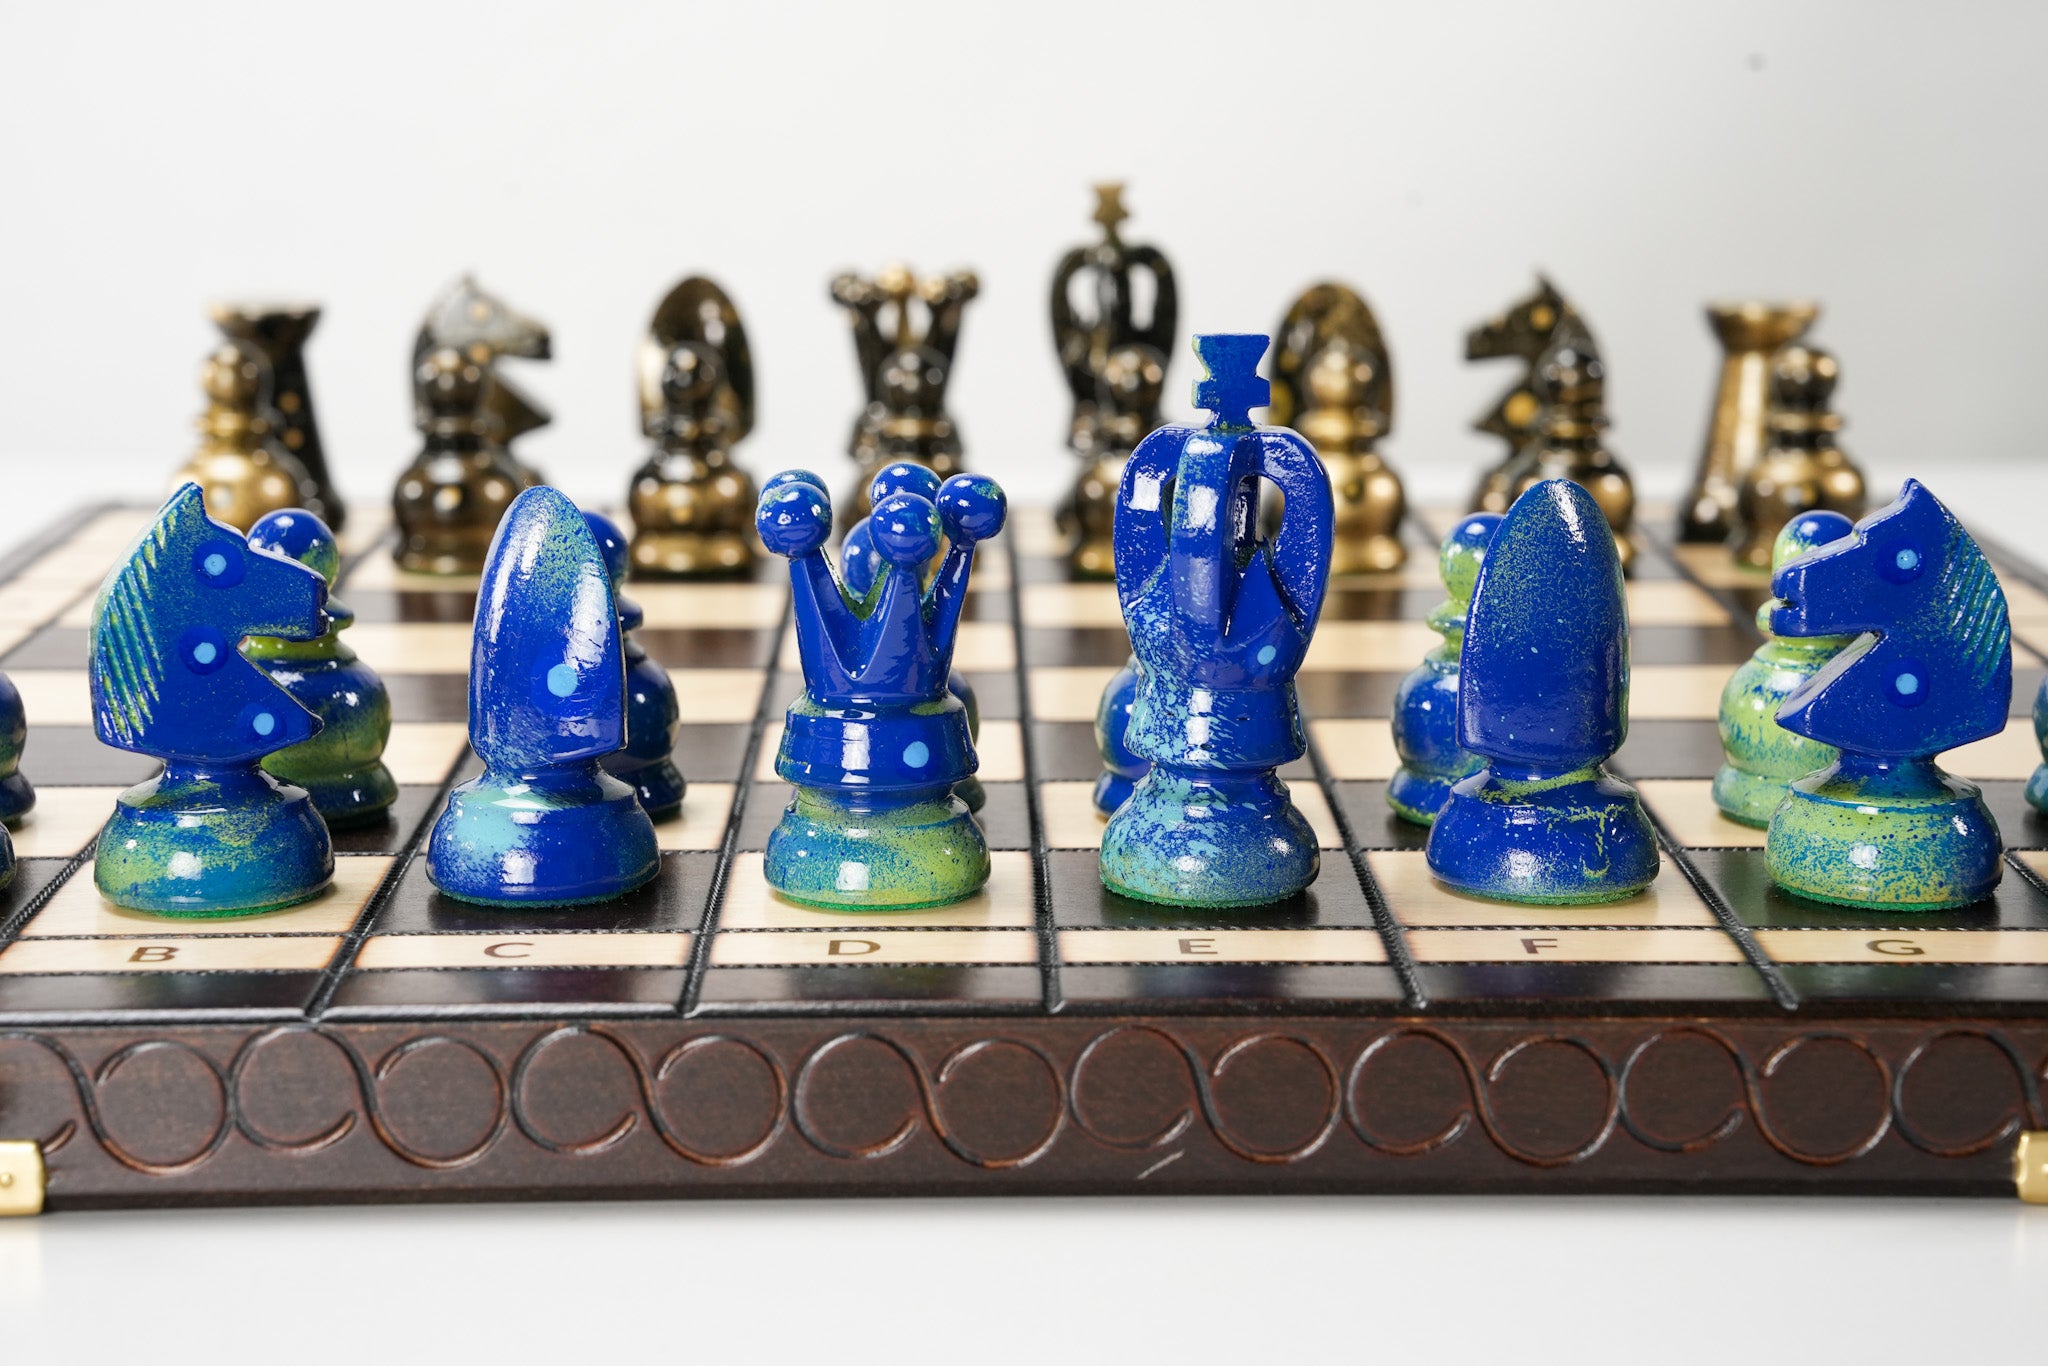 The Smooth Operator - Sydney Gruber Painted 17" Large Kings Chess Set #7 - Chess Set - Chess-House